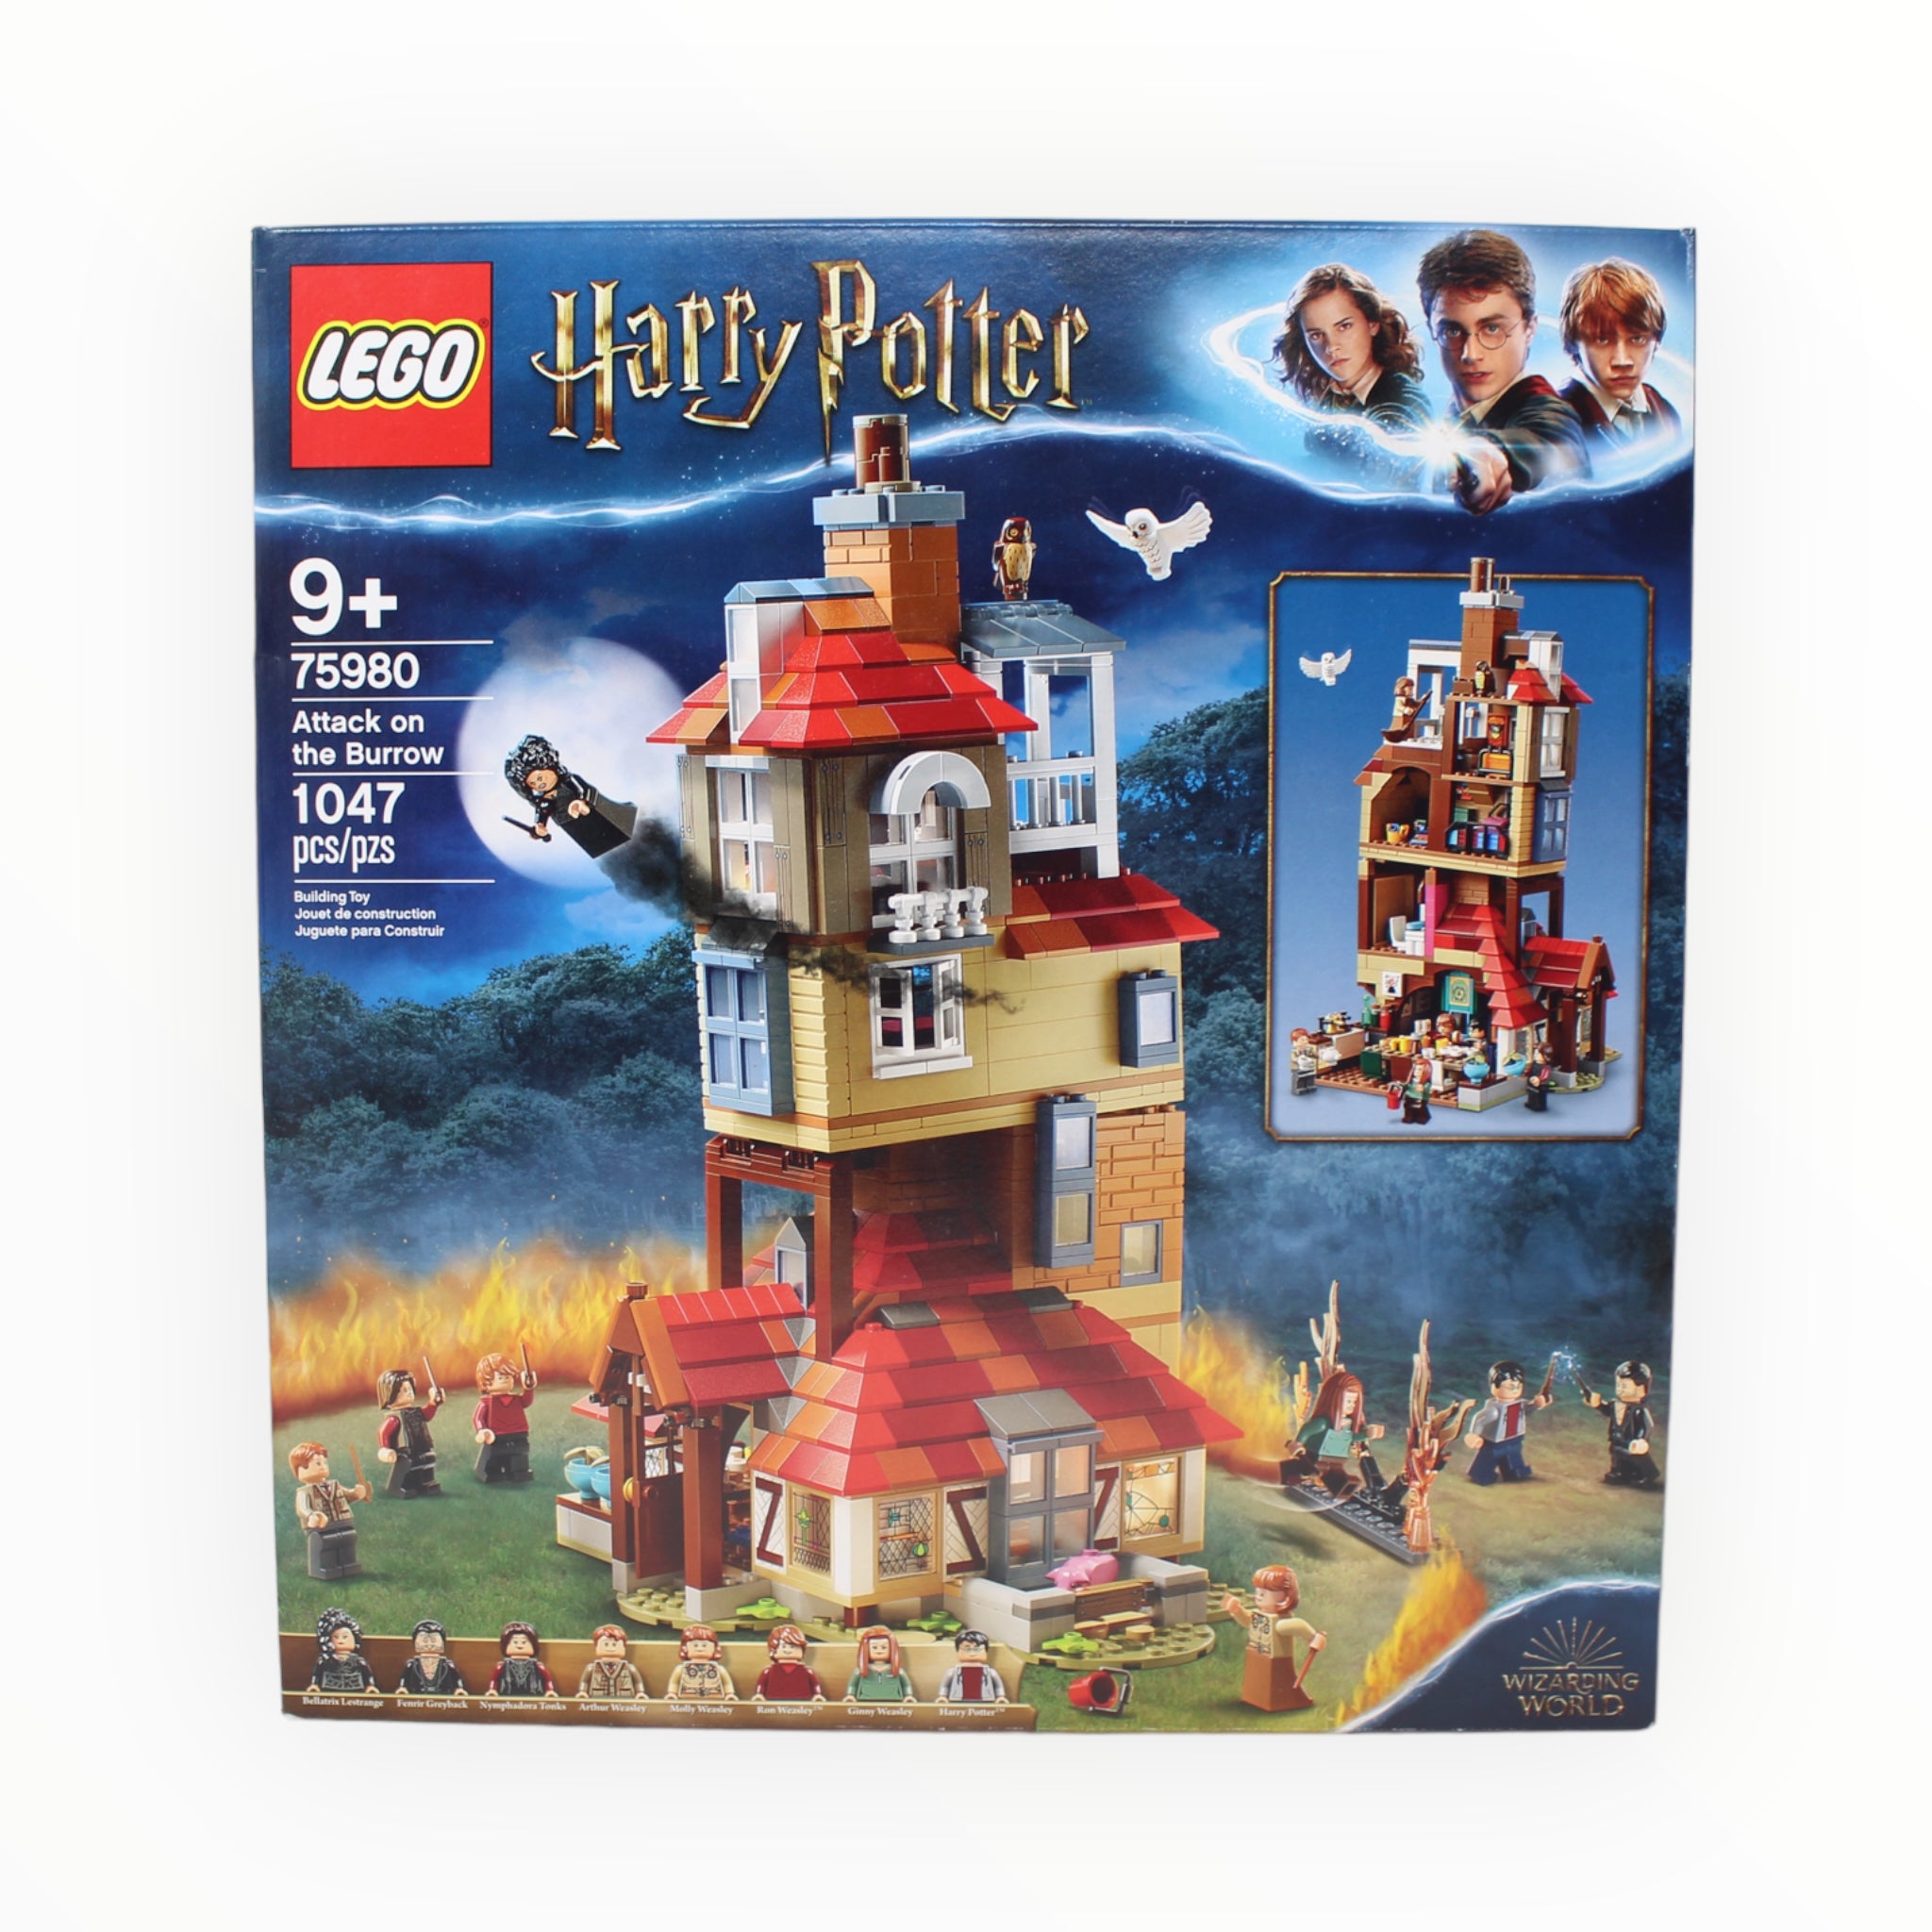 Retired Set 75980 Harry Potter Attack on the Burrow